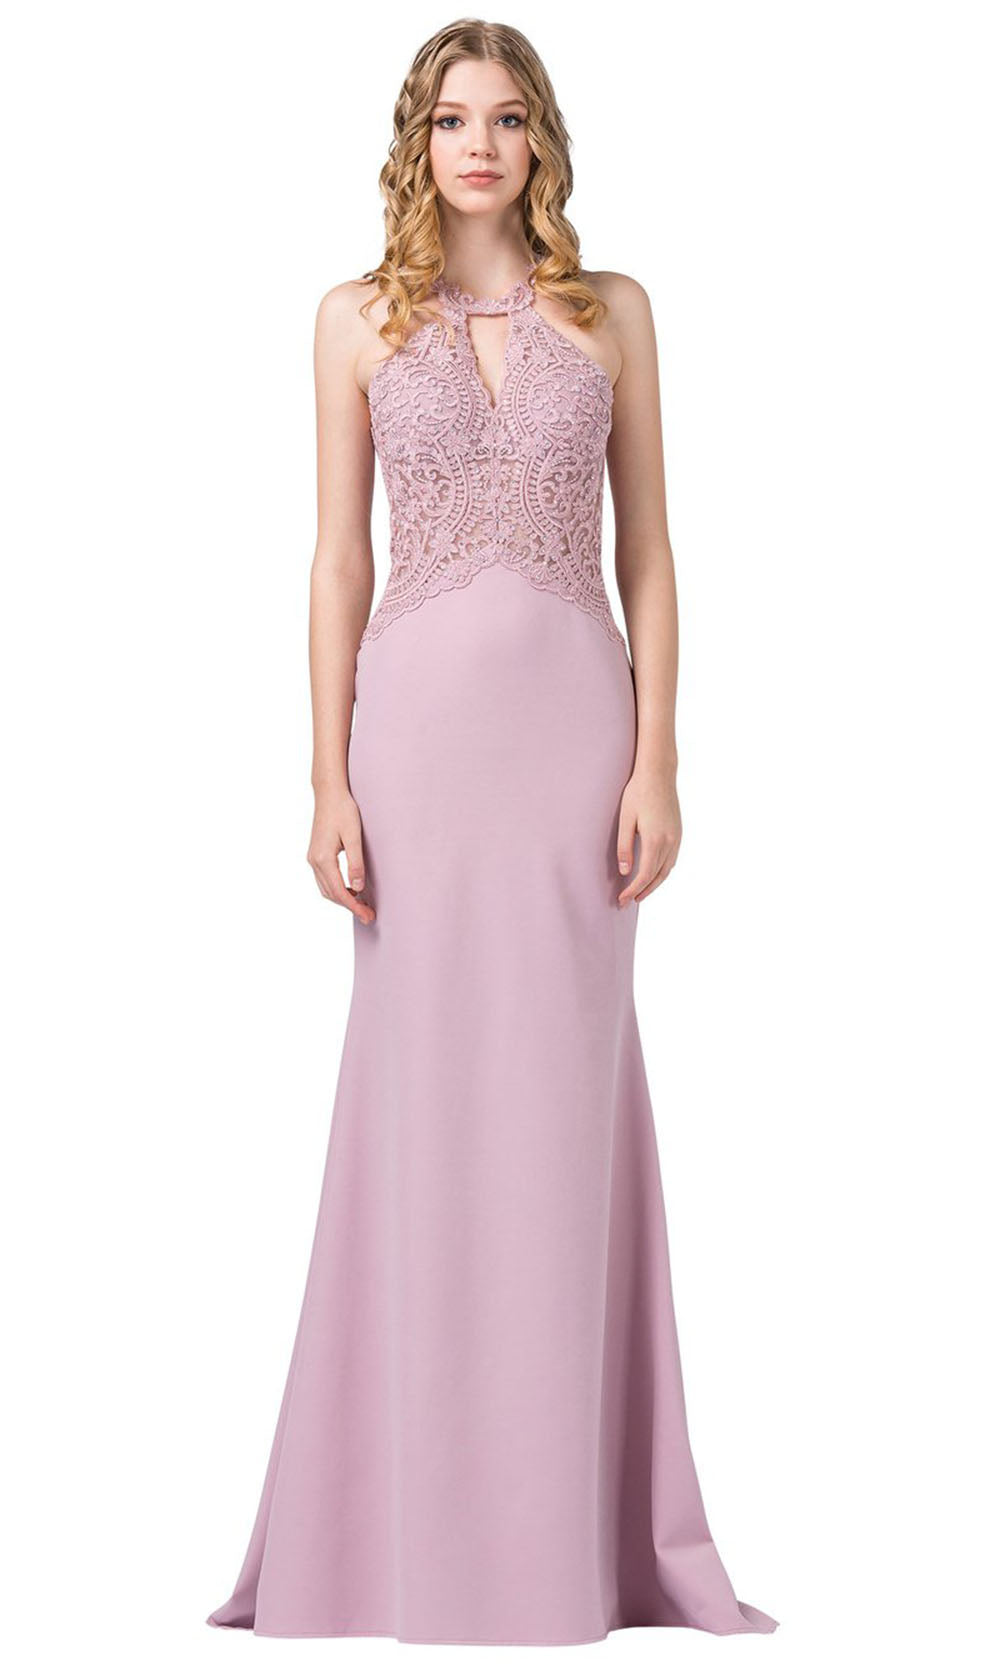 Dancing Queen - 2787 Embroidered Cutout Halter Long Dress In Pink